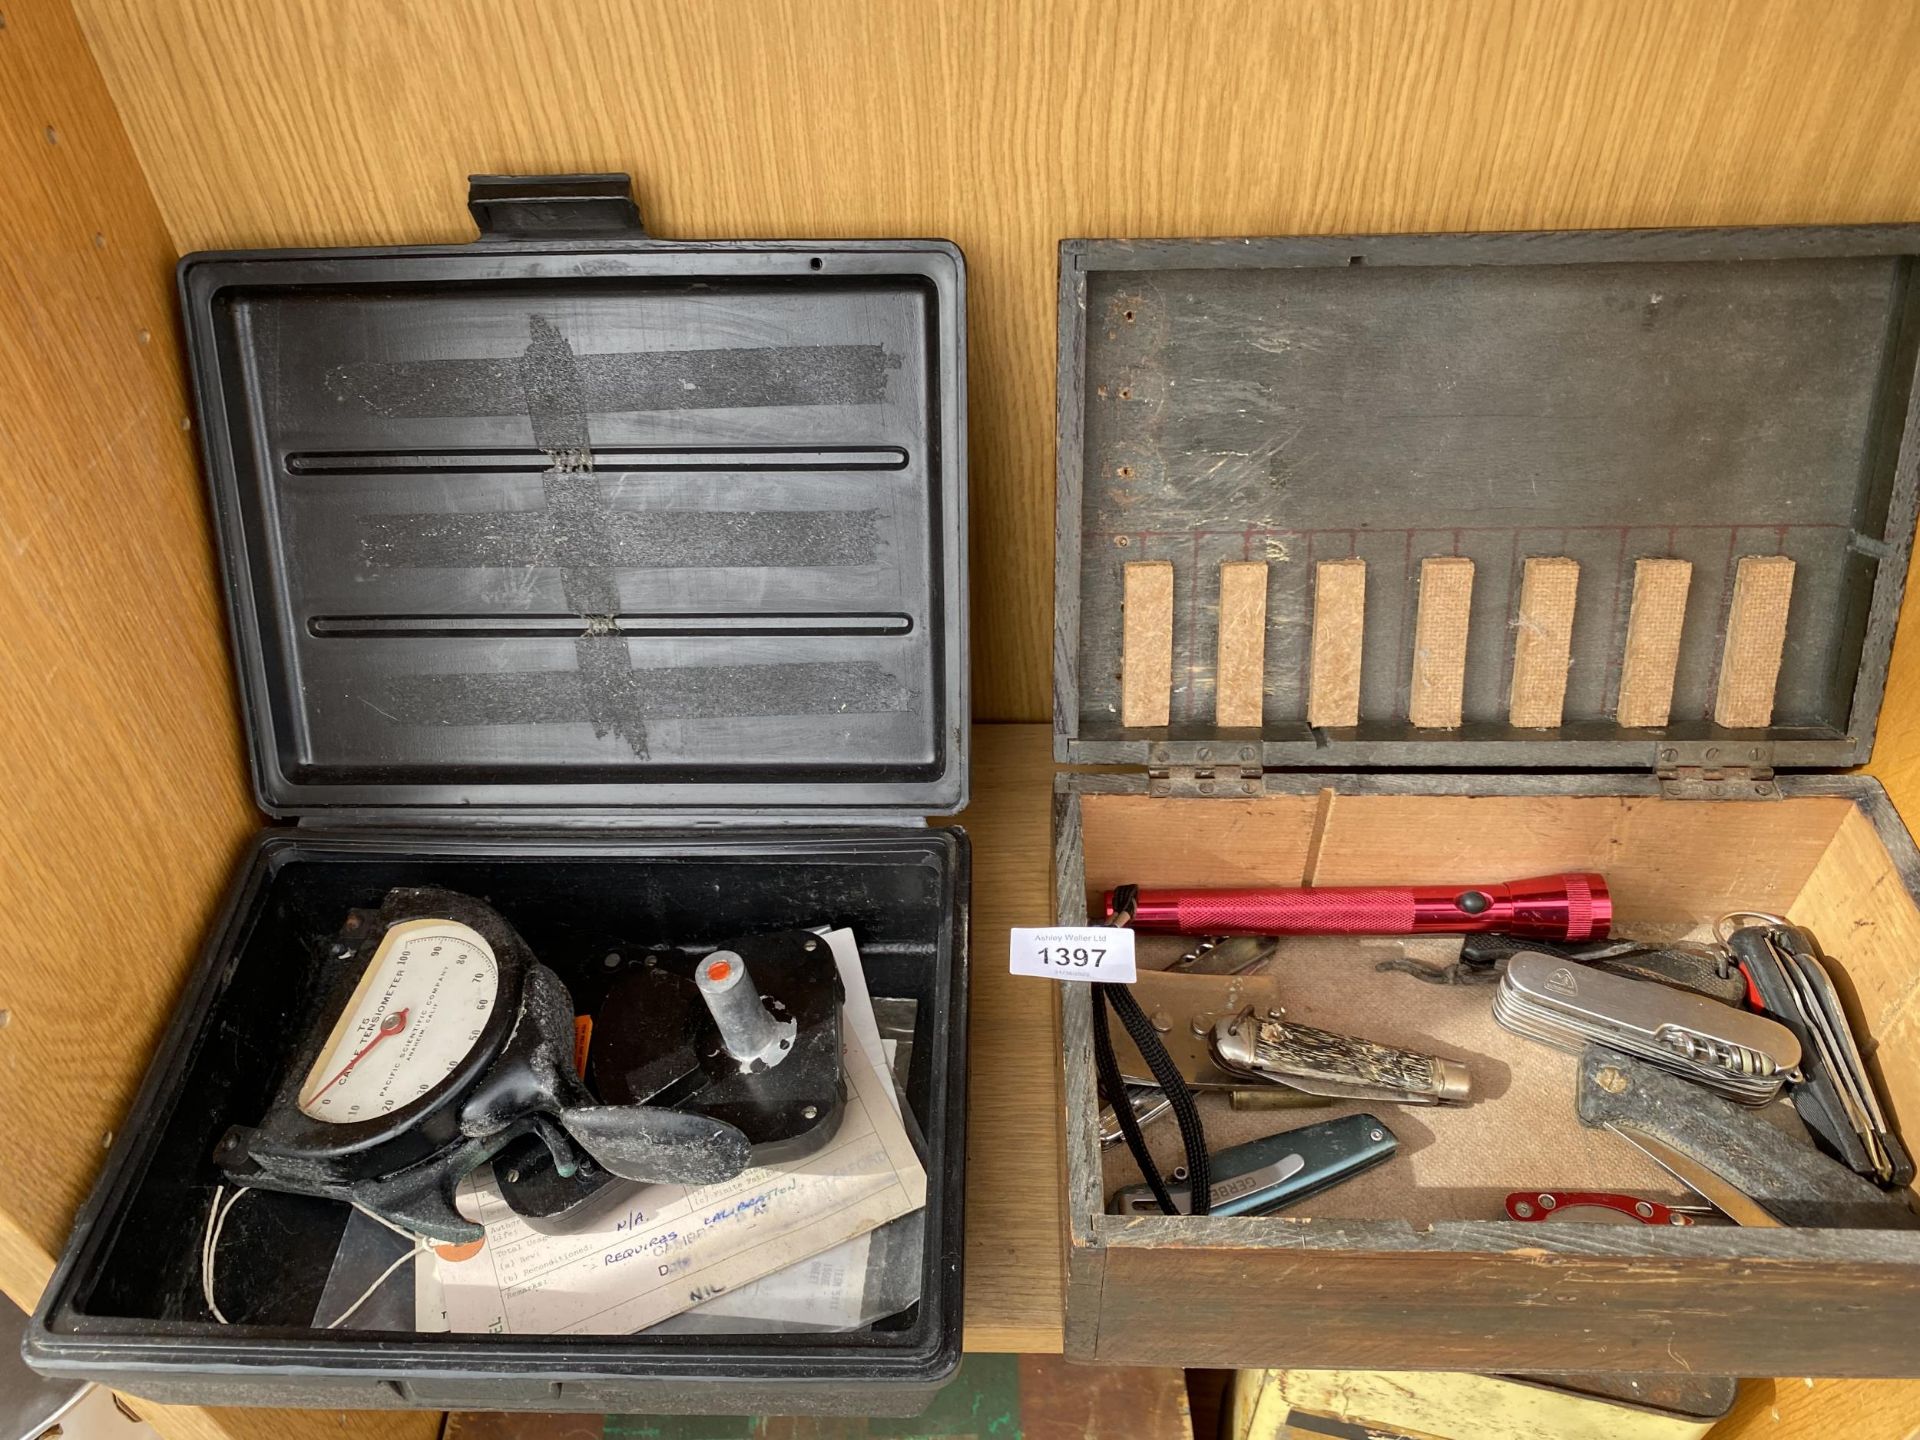 AN ASSORTMENT OF POCKET KNIVES AND A CABLE TENSIOMETER